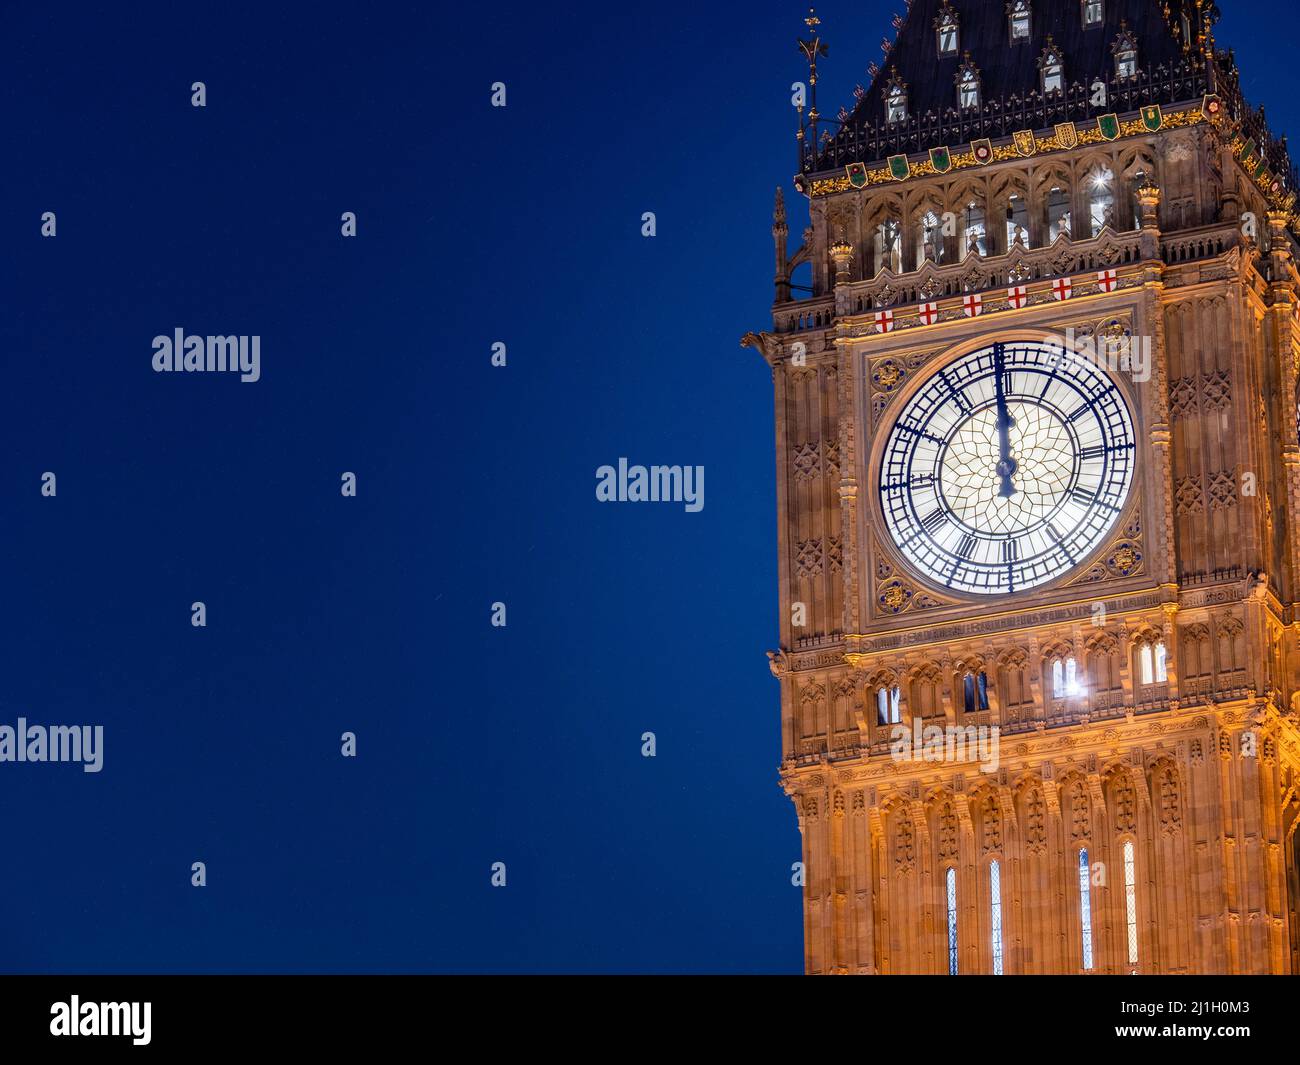 Big Ben at midnight. The iconic London landmark clock tower at exactly 12 o'clock; illuminated and set against a clear blue night sky with copy space. Stock Photo